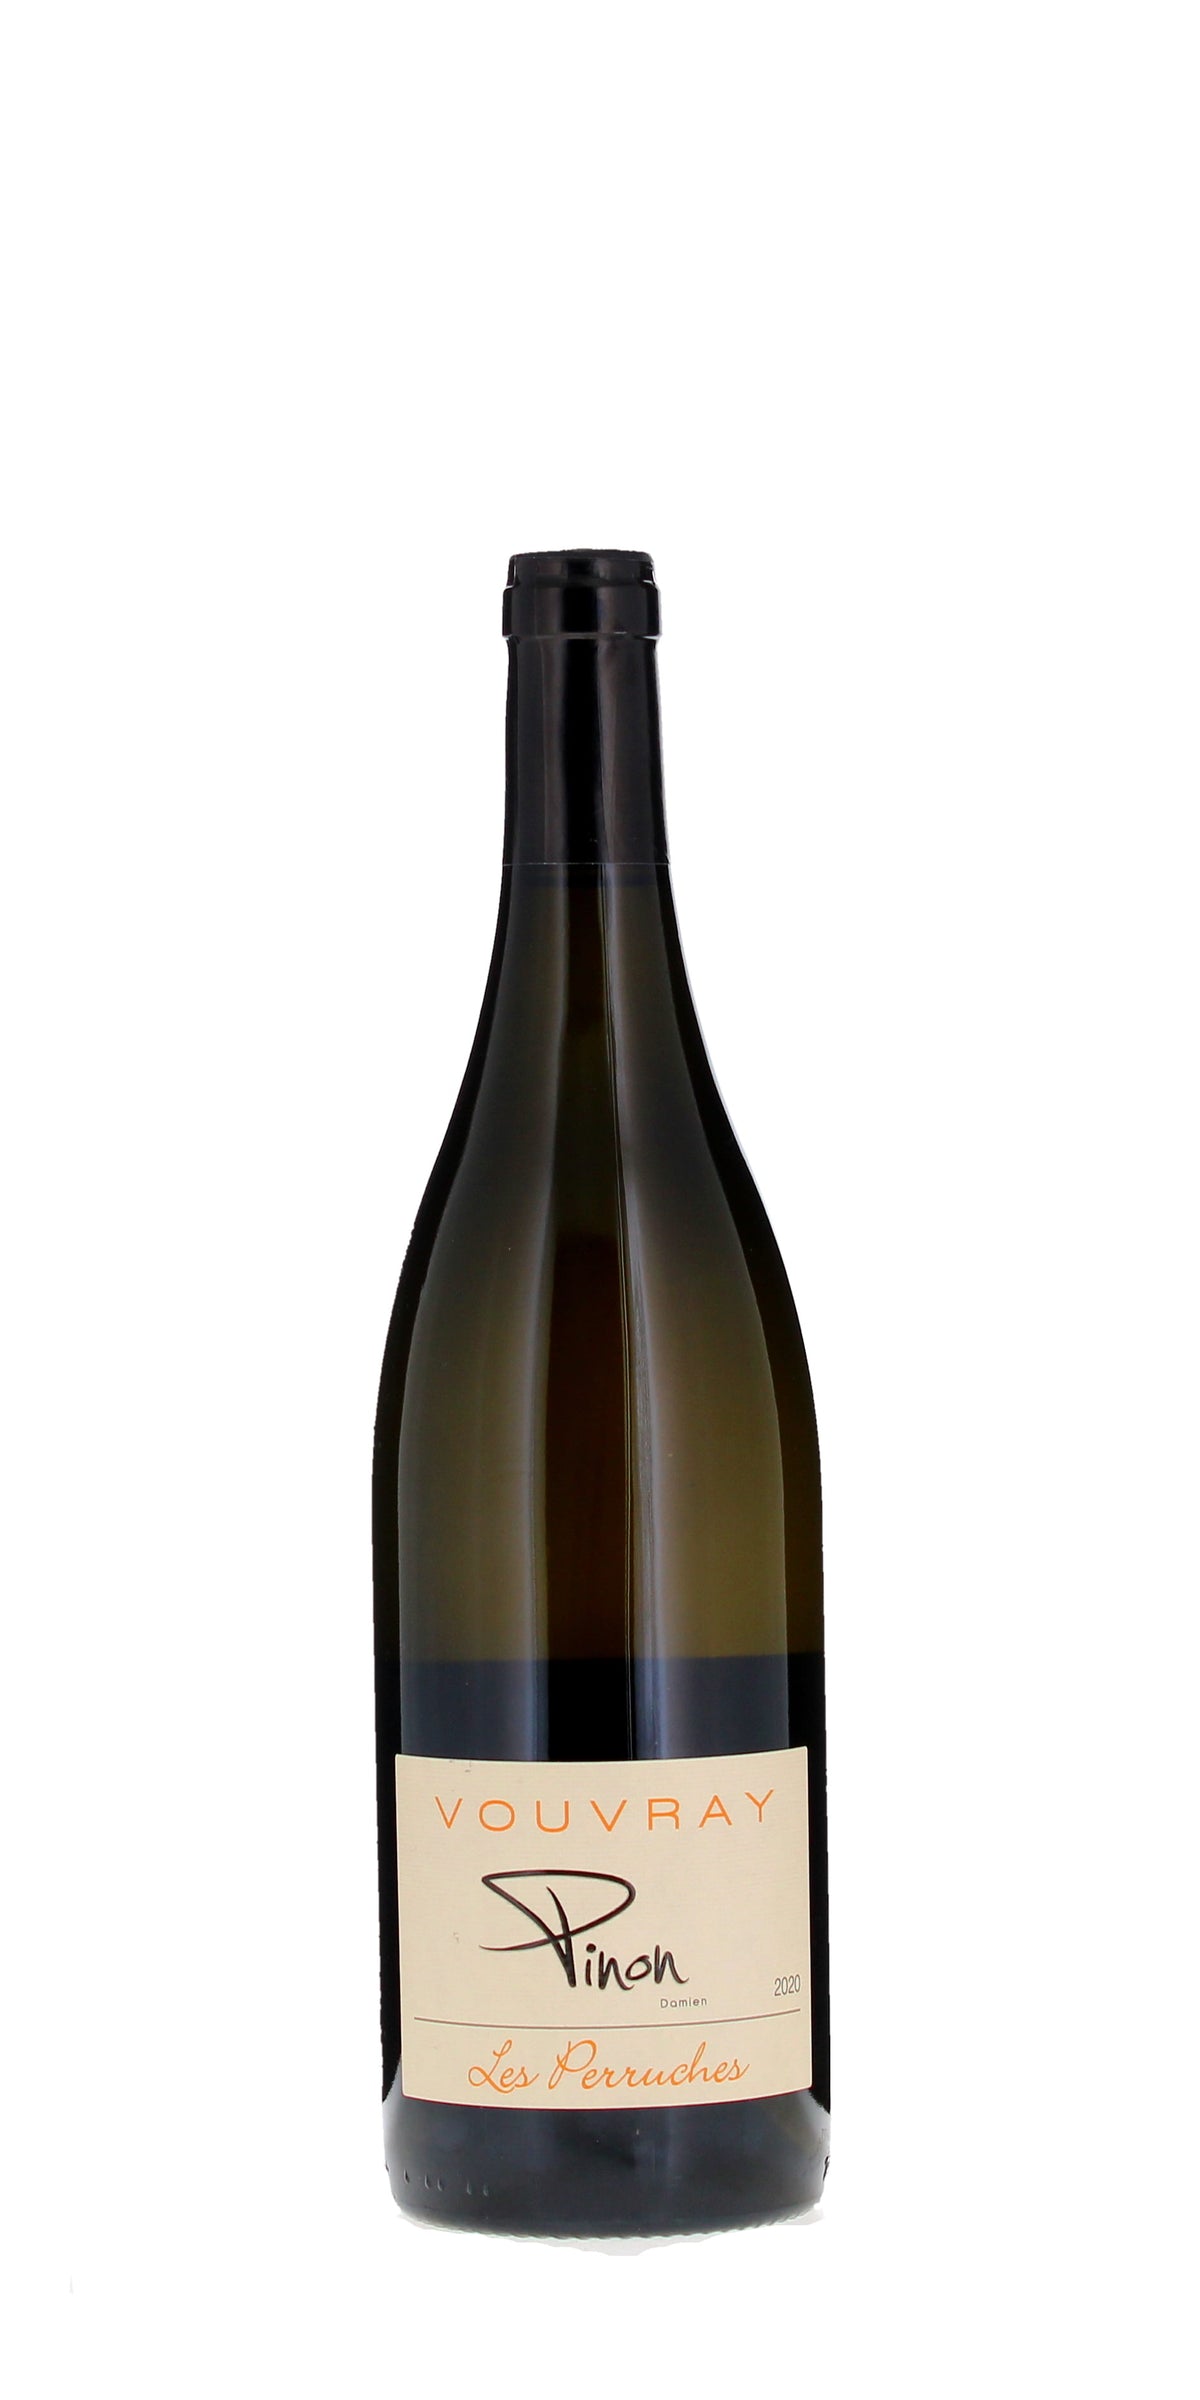 Domaine Pinon, Vouvray Moelleux Les Perruches 2020